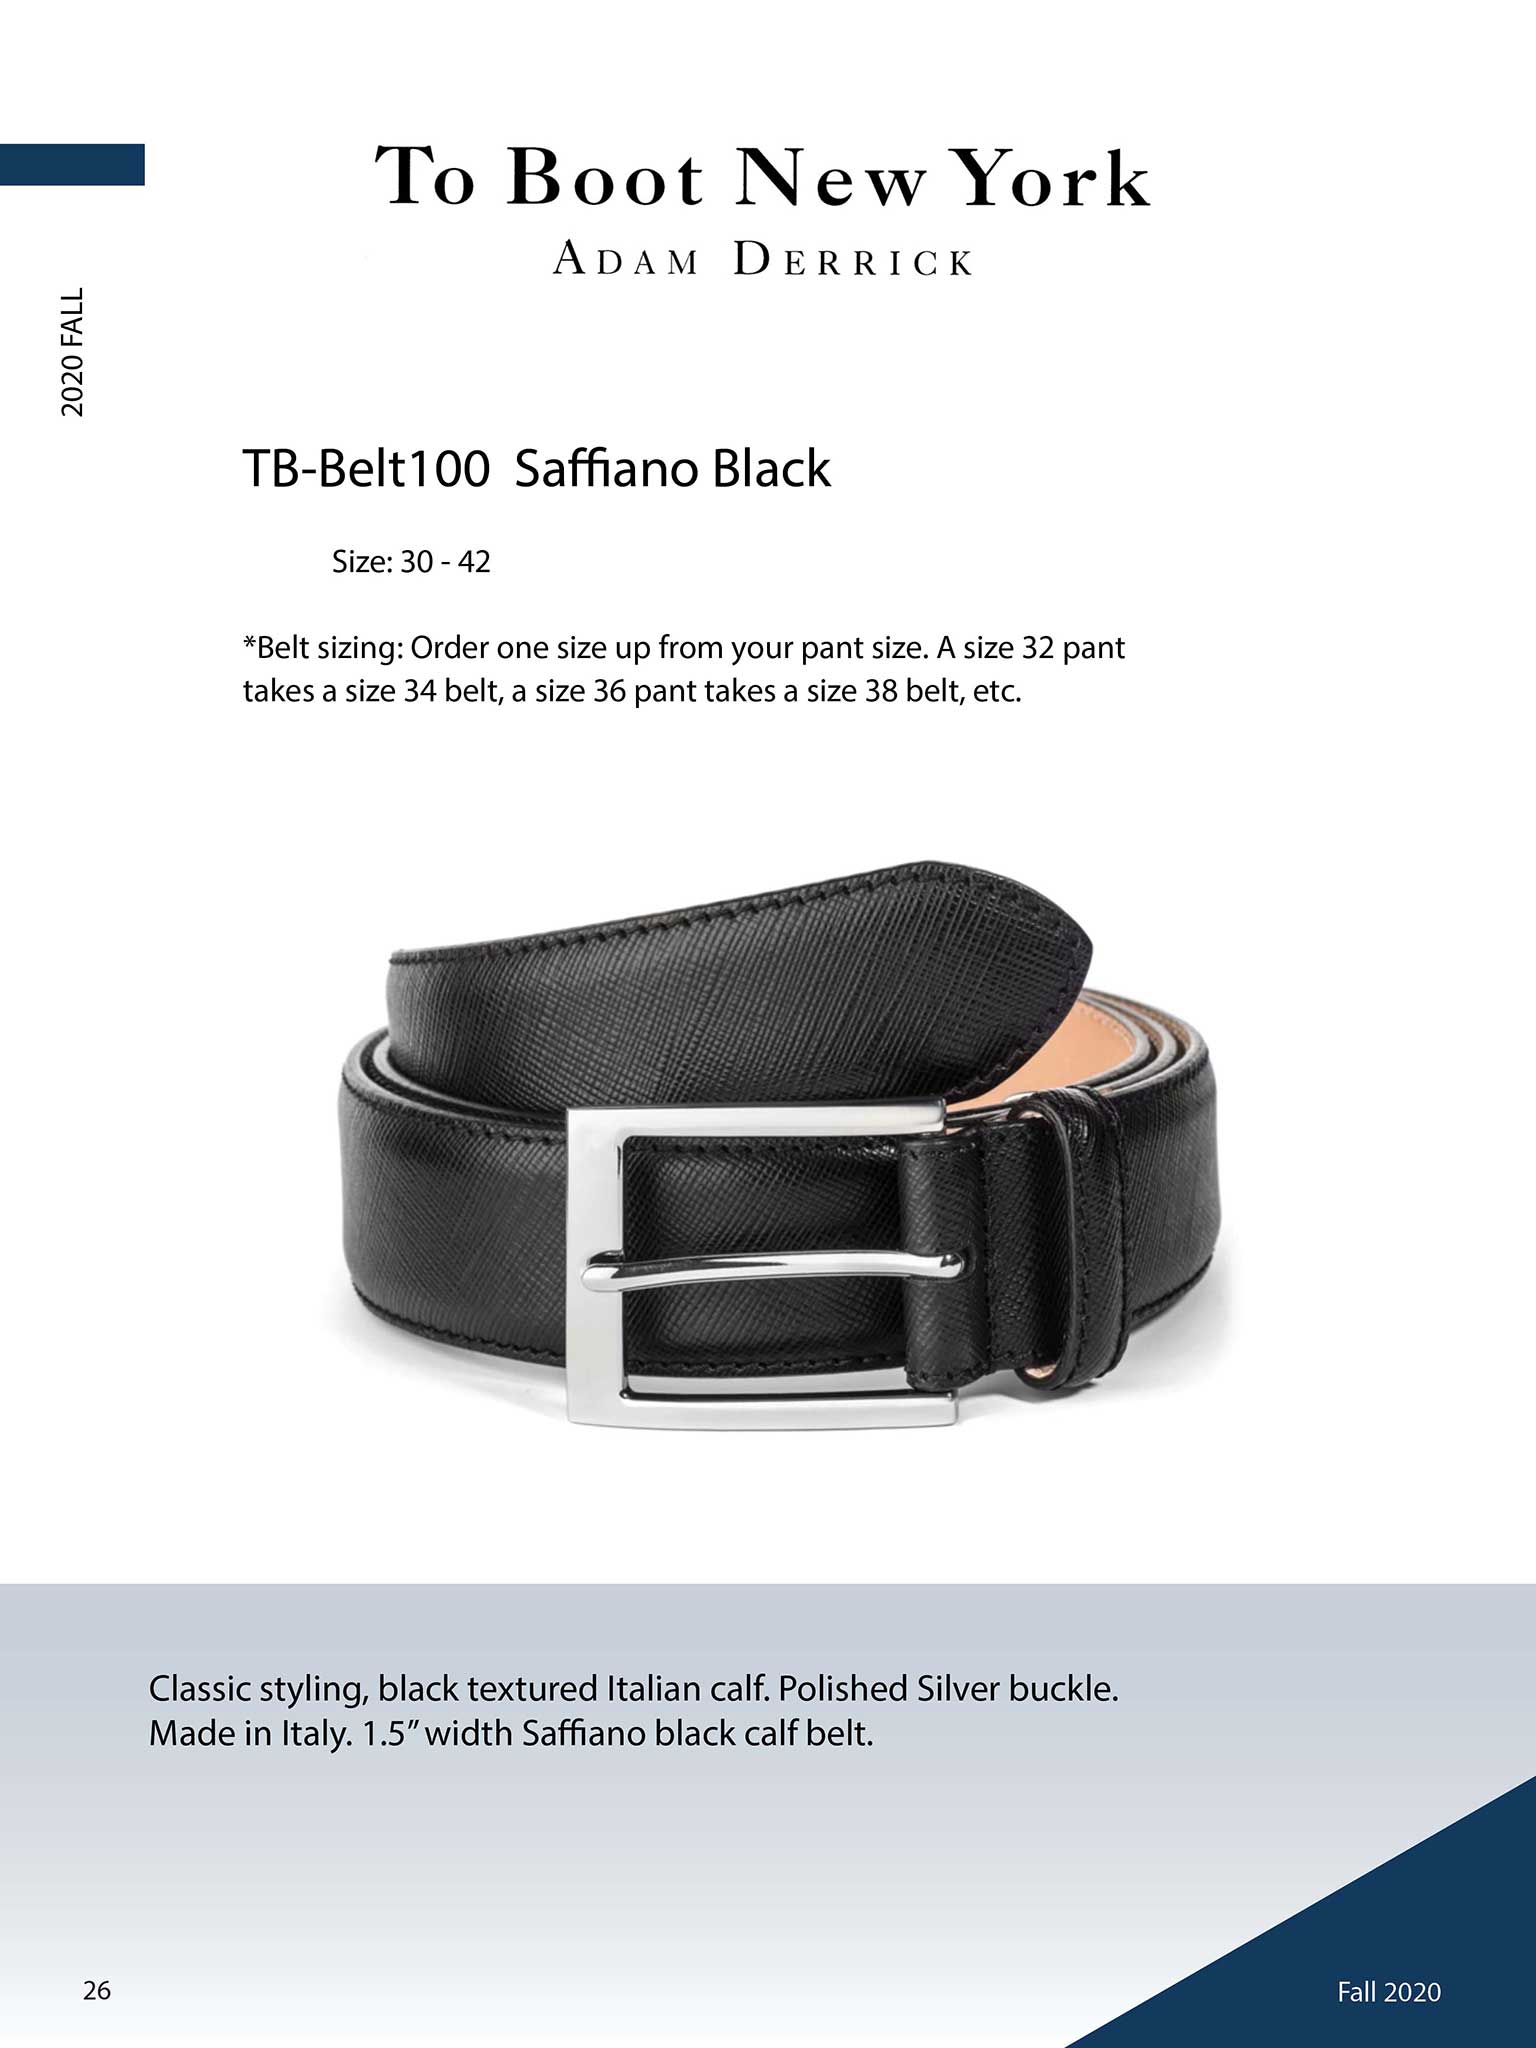 Saffiano Black Belt by To Boot New York